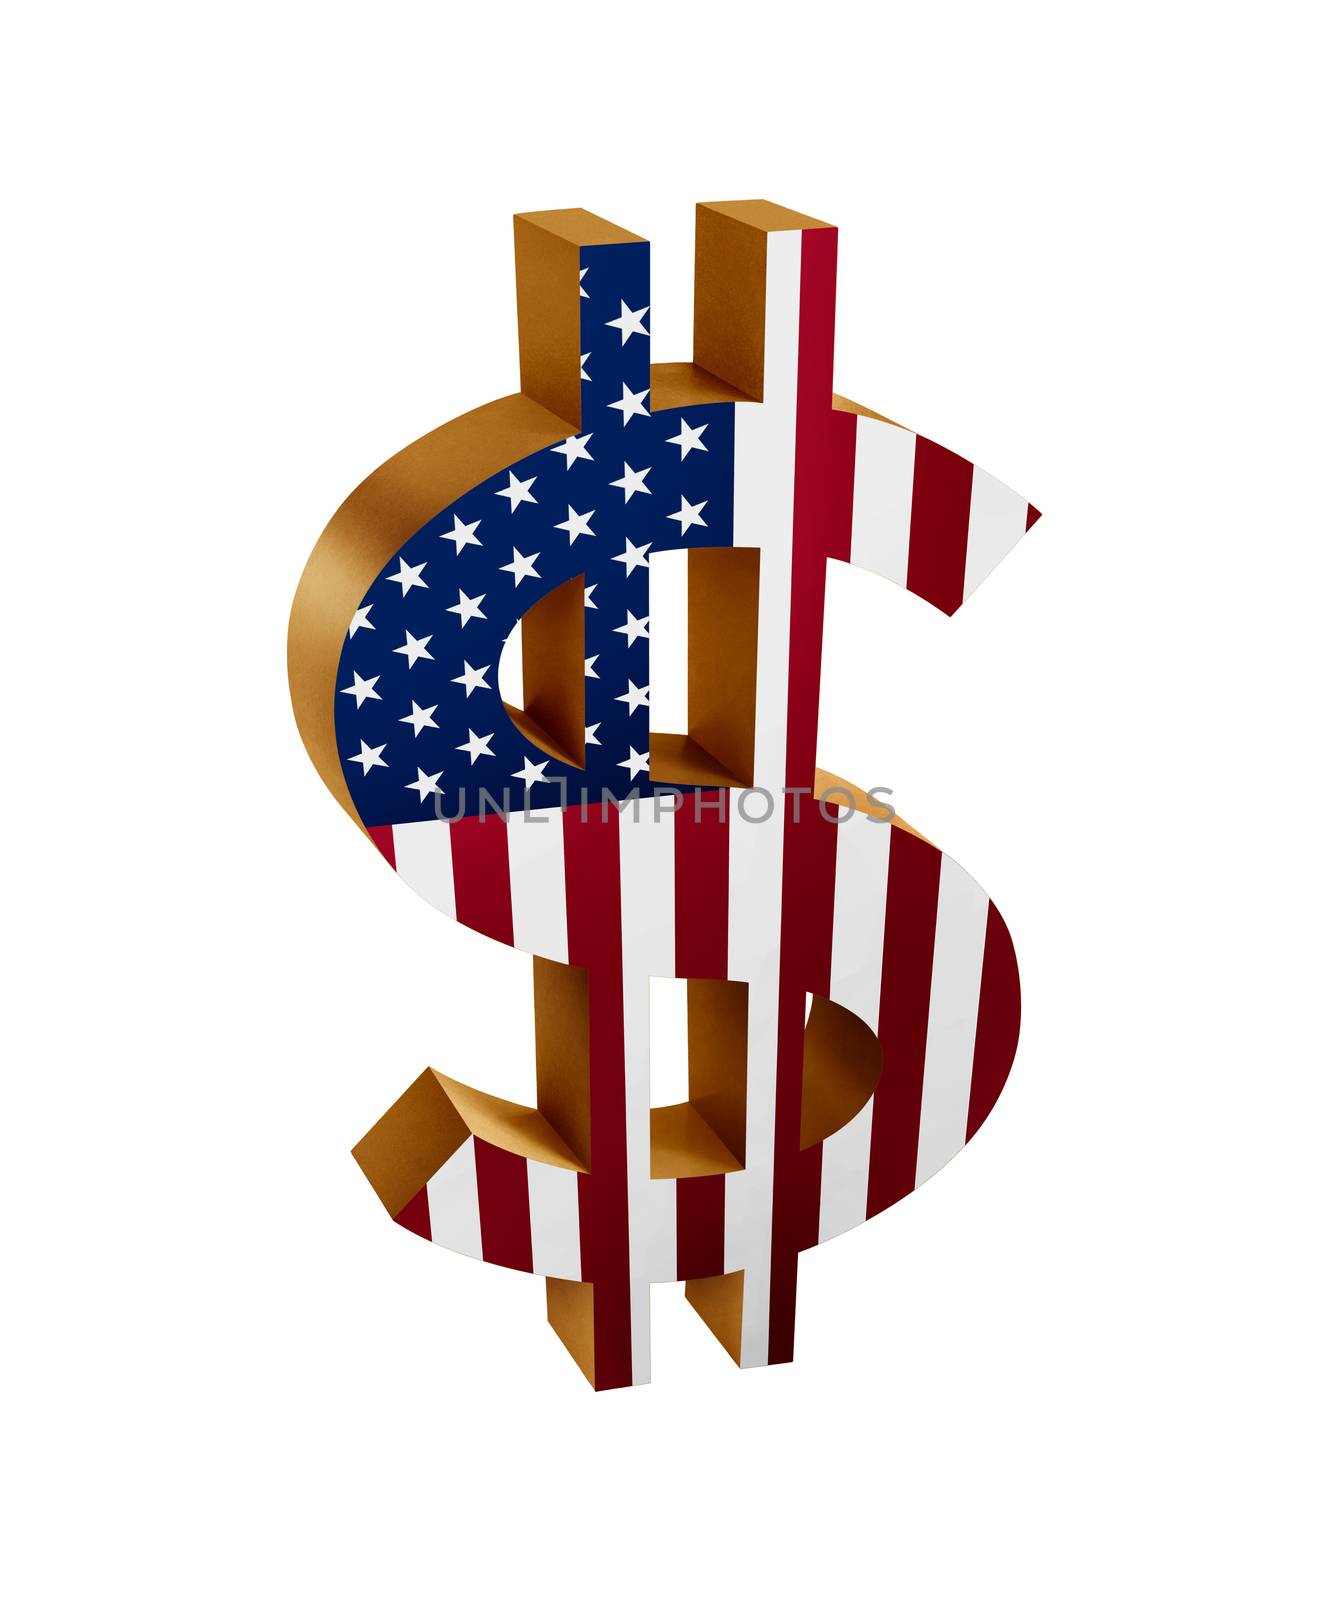 US Dollar Sign with the US flag isolated in white background